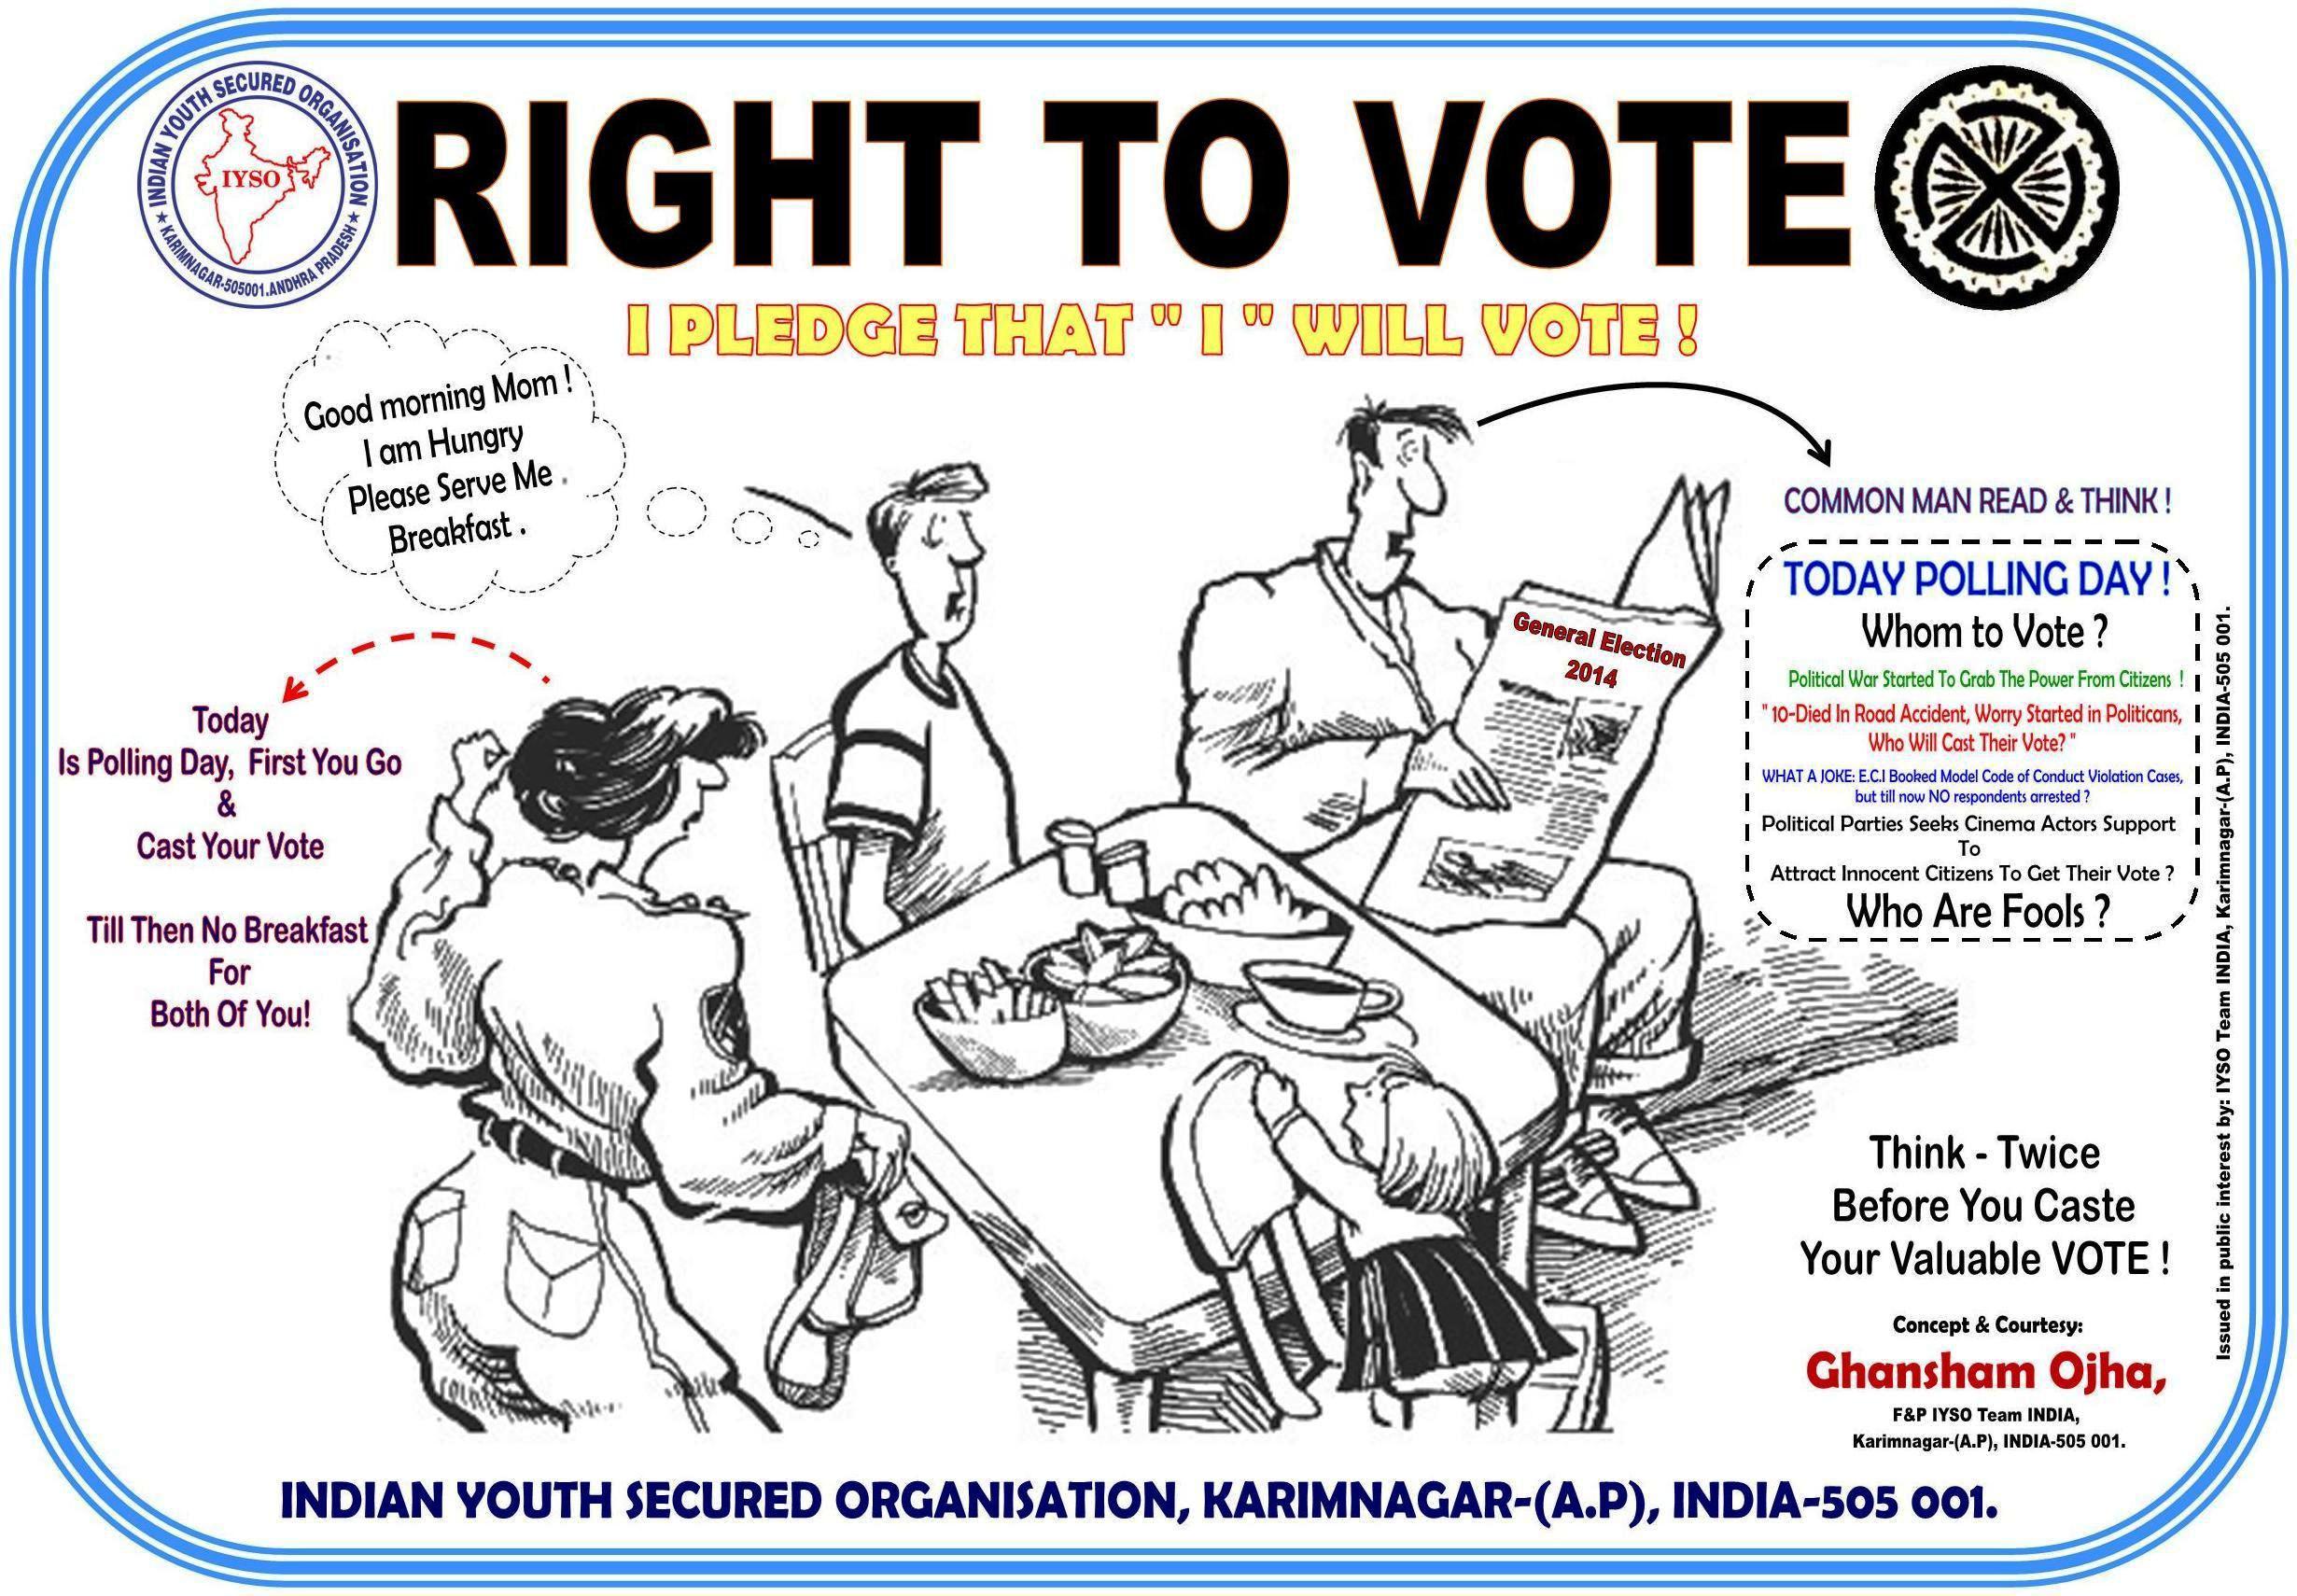 Right to vote